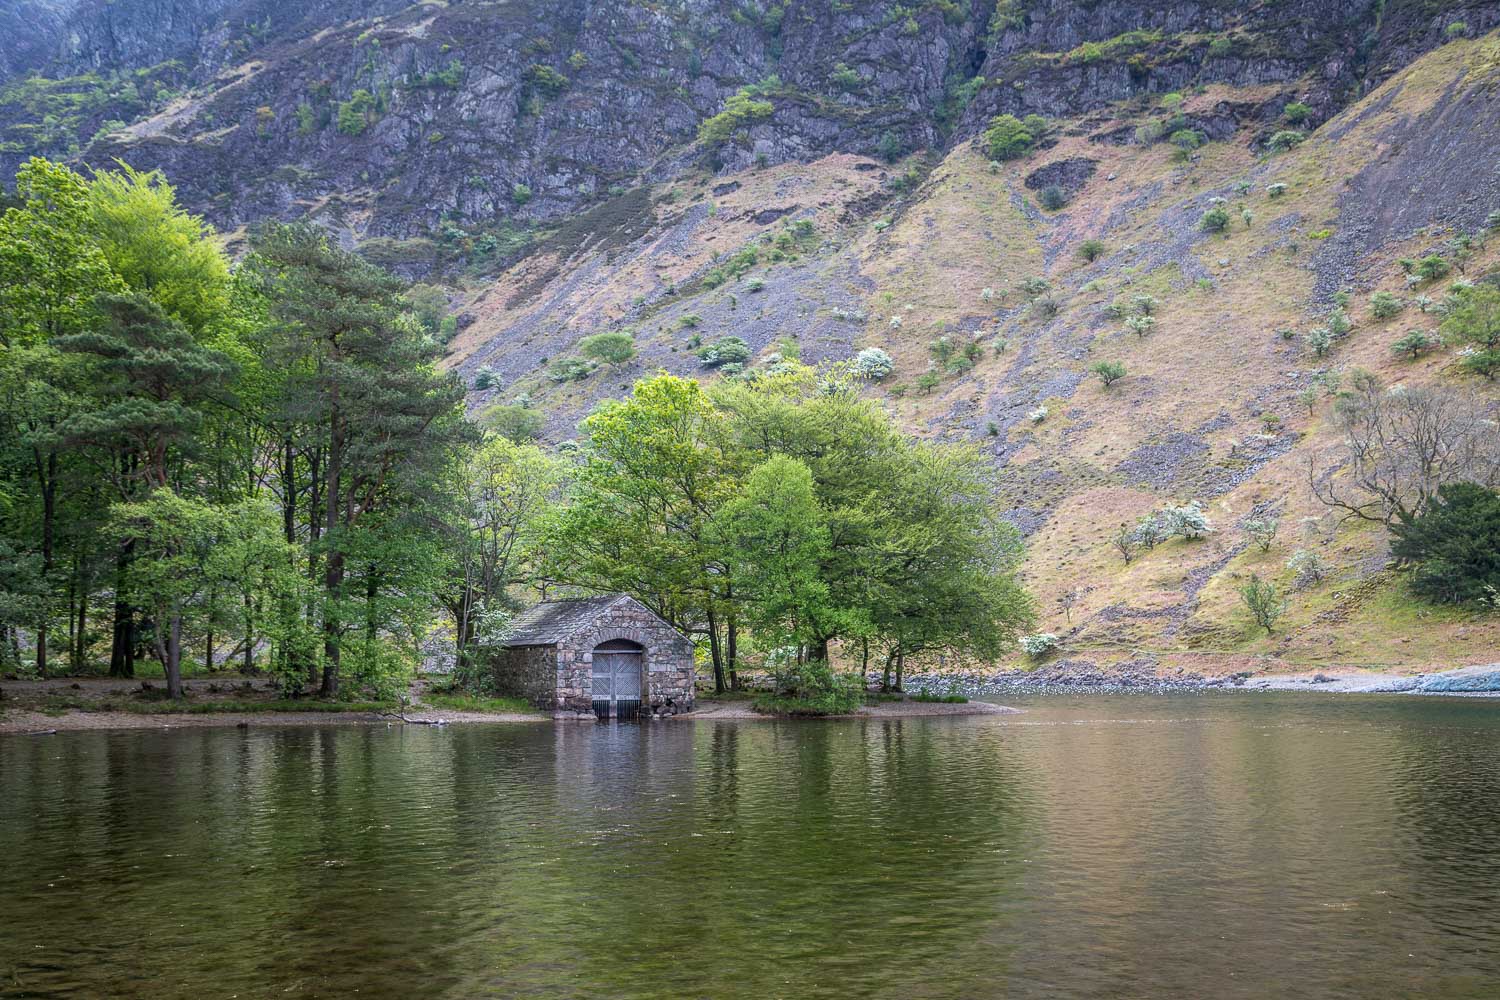 Wast Water boathouse